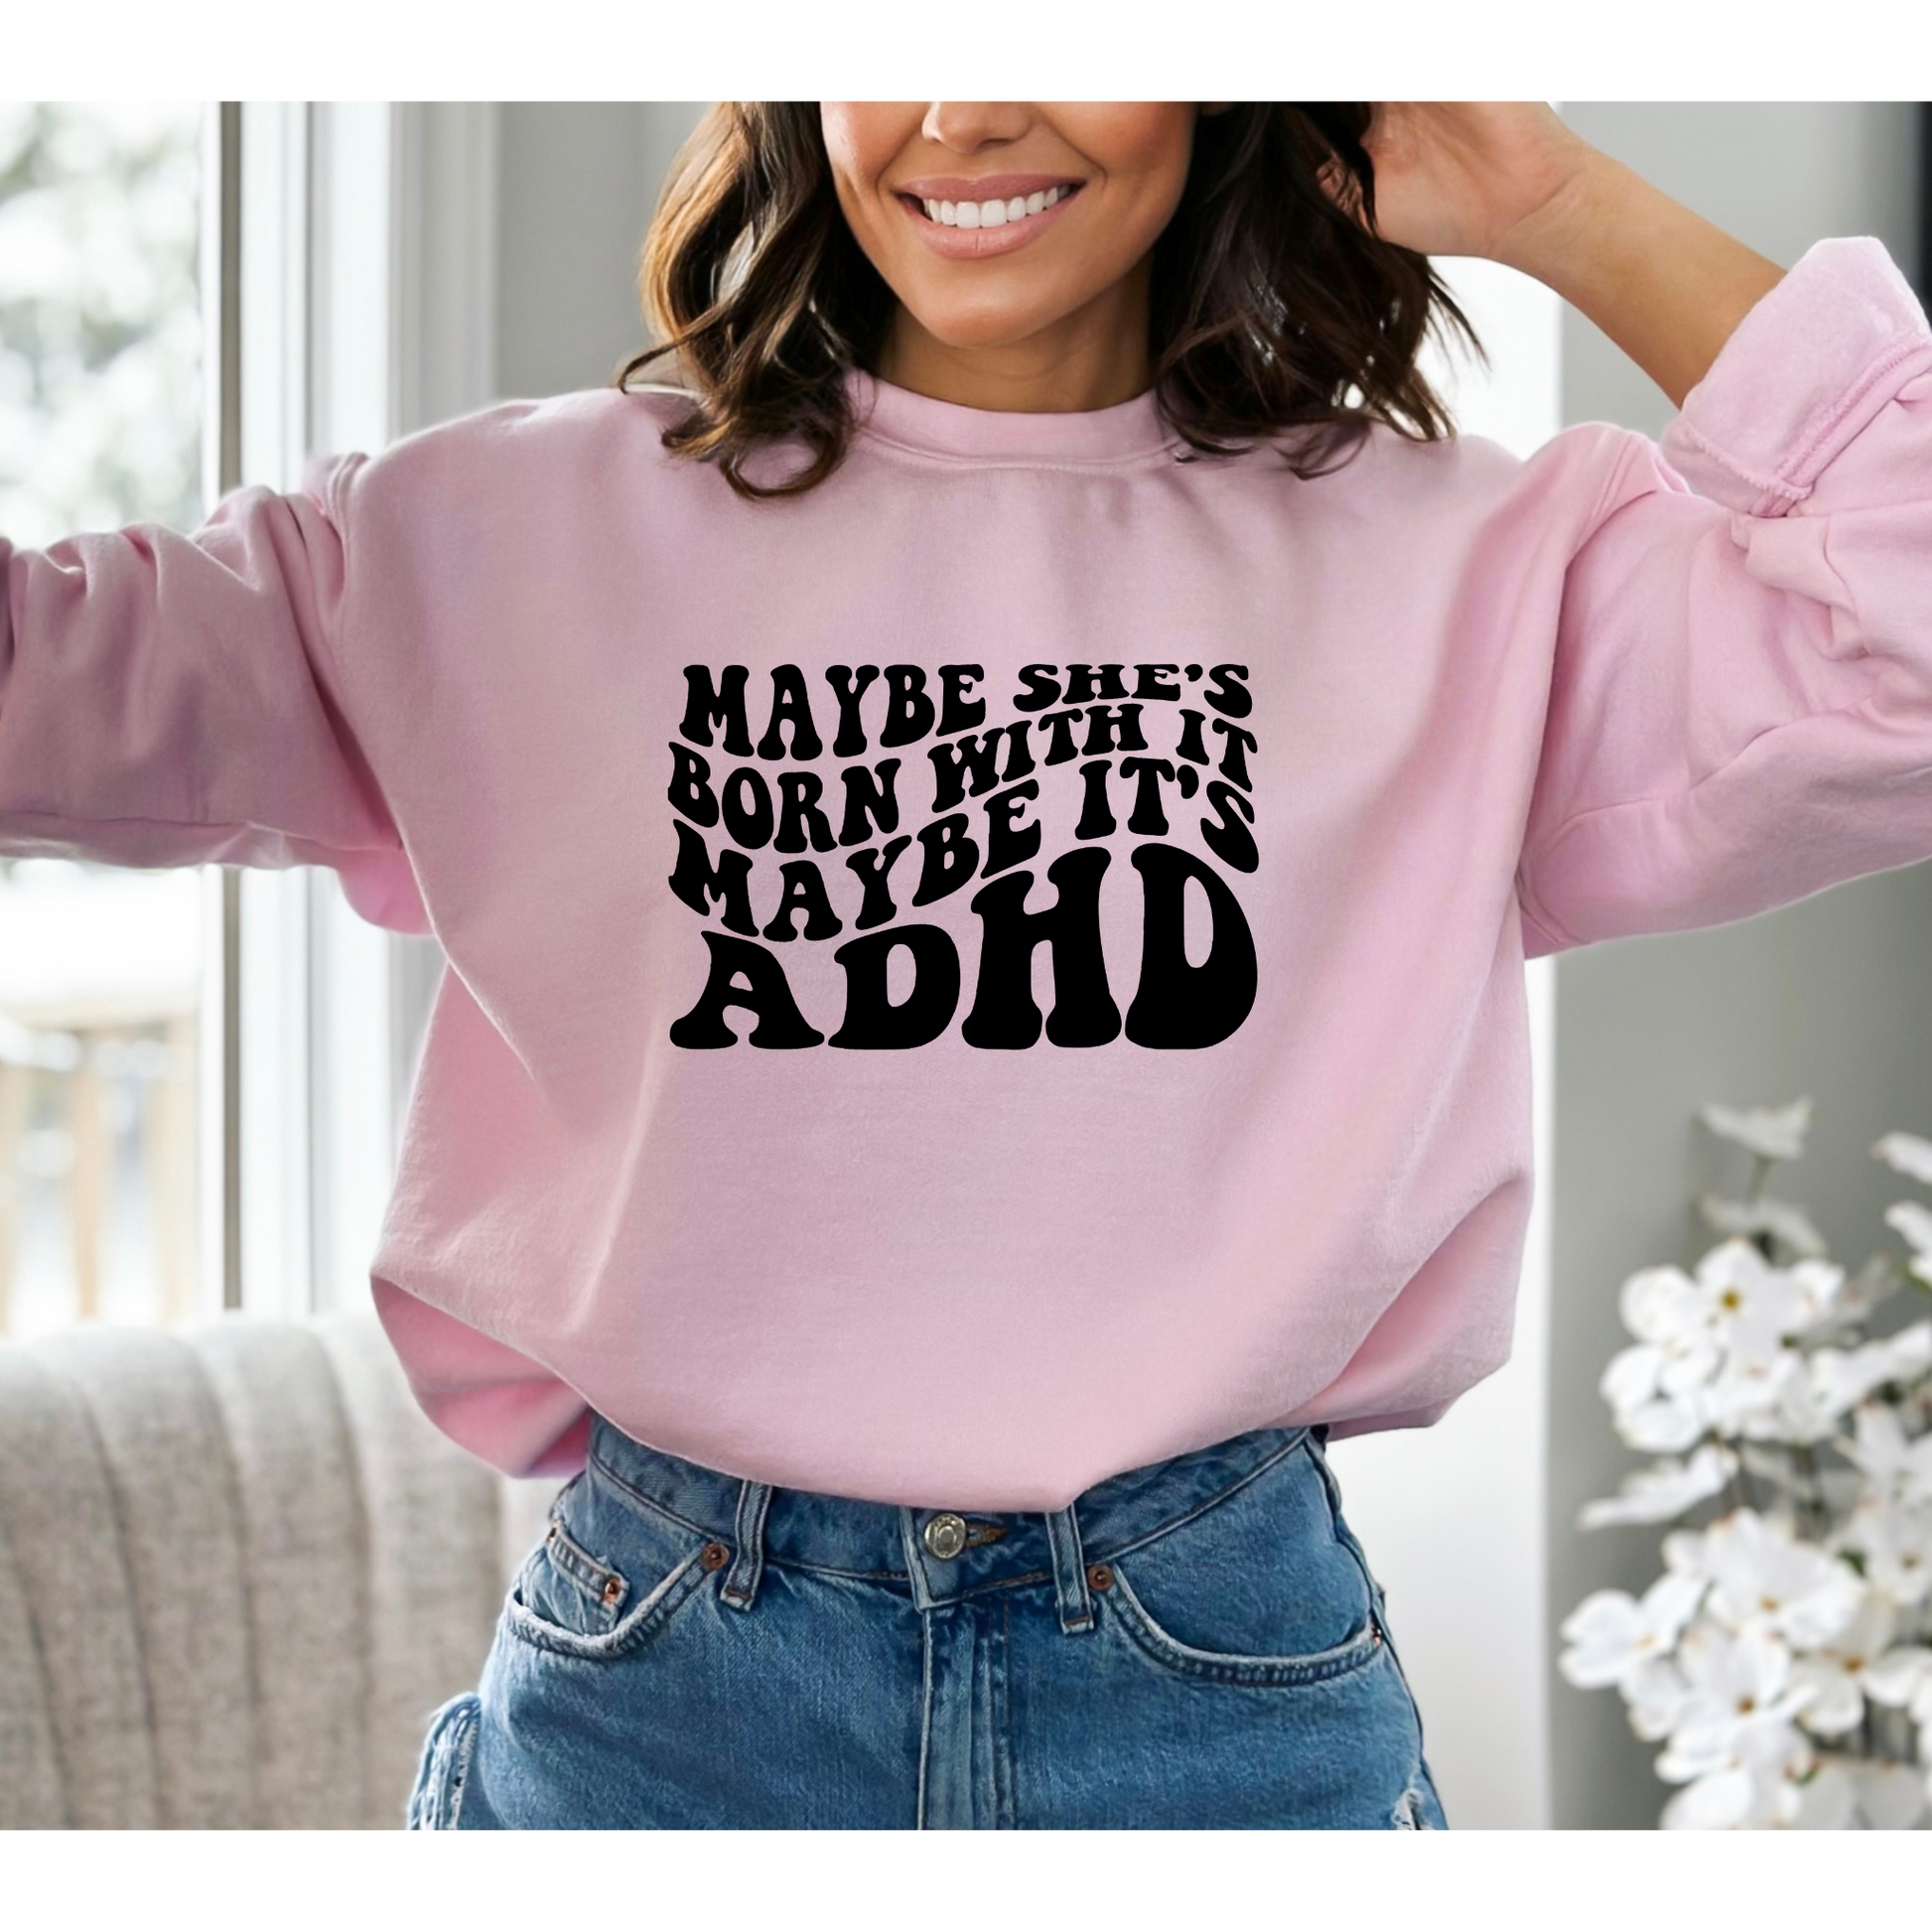 Maybe She's Born With It Maybe It's ADHD Crewneck Sweatshirt Light Pink